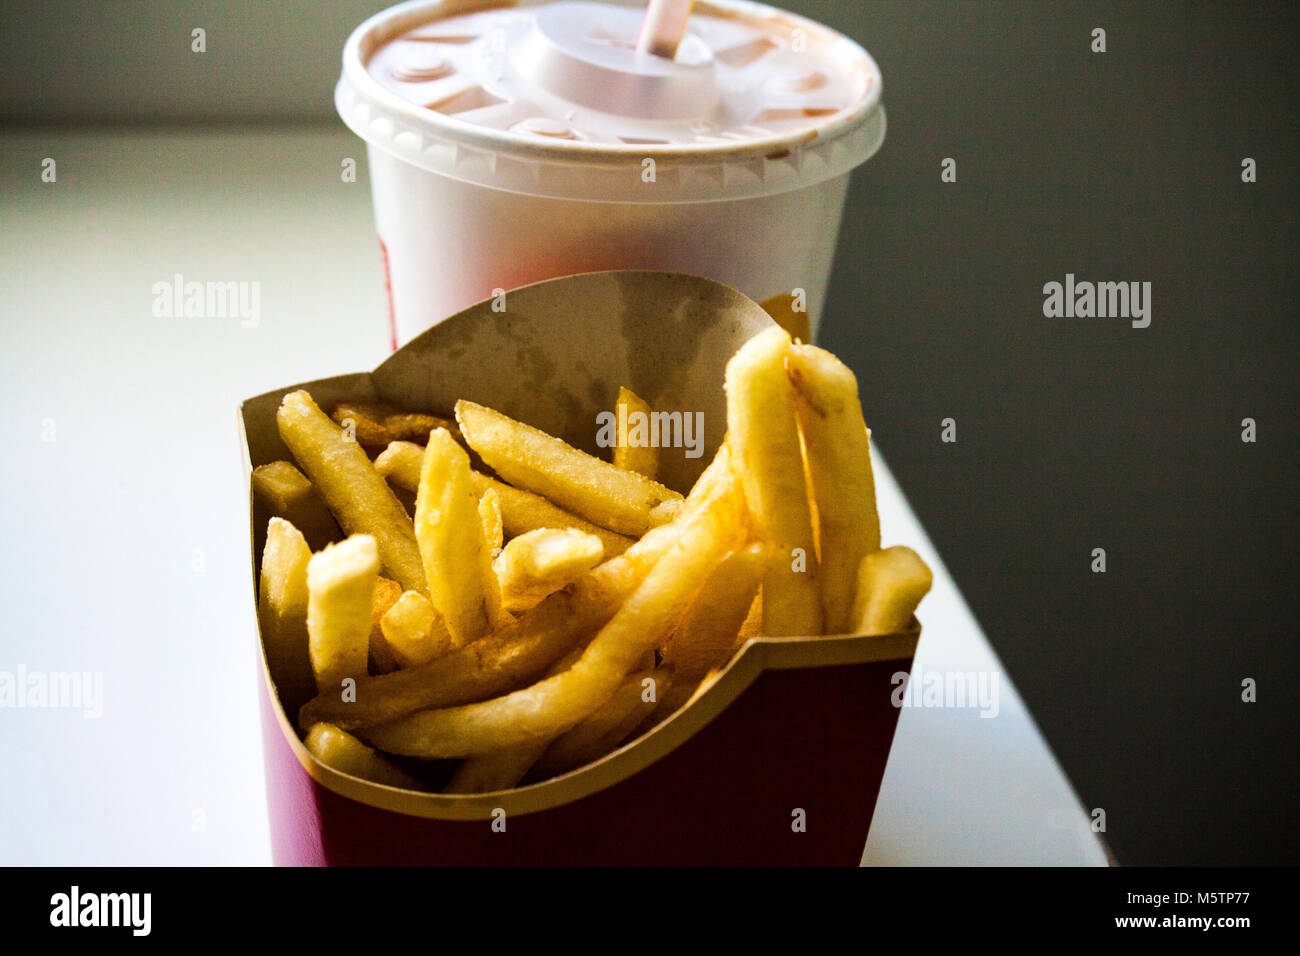 Drink and french fries on white background Stock Photo